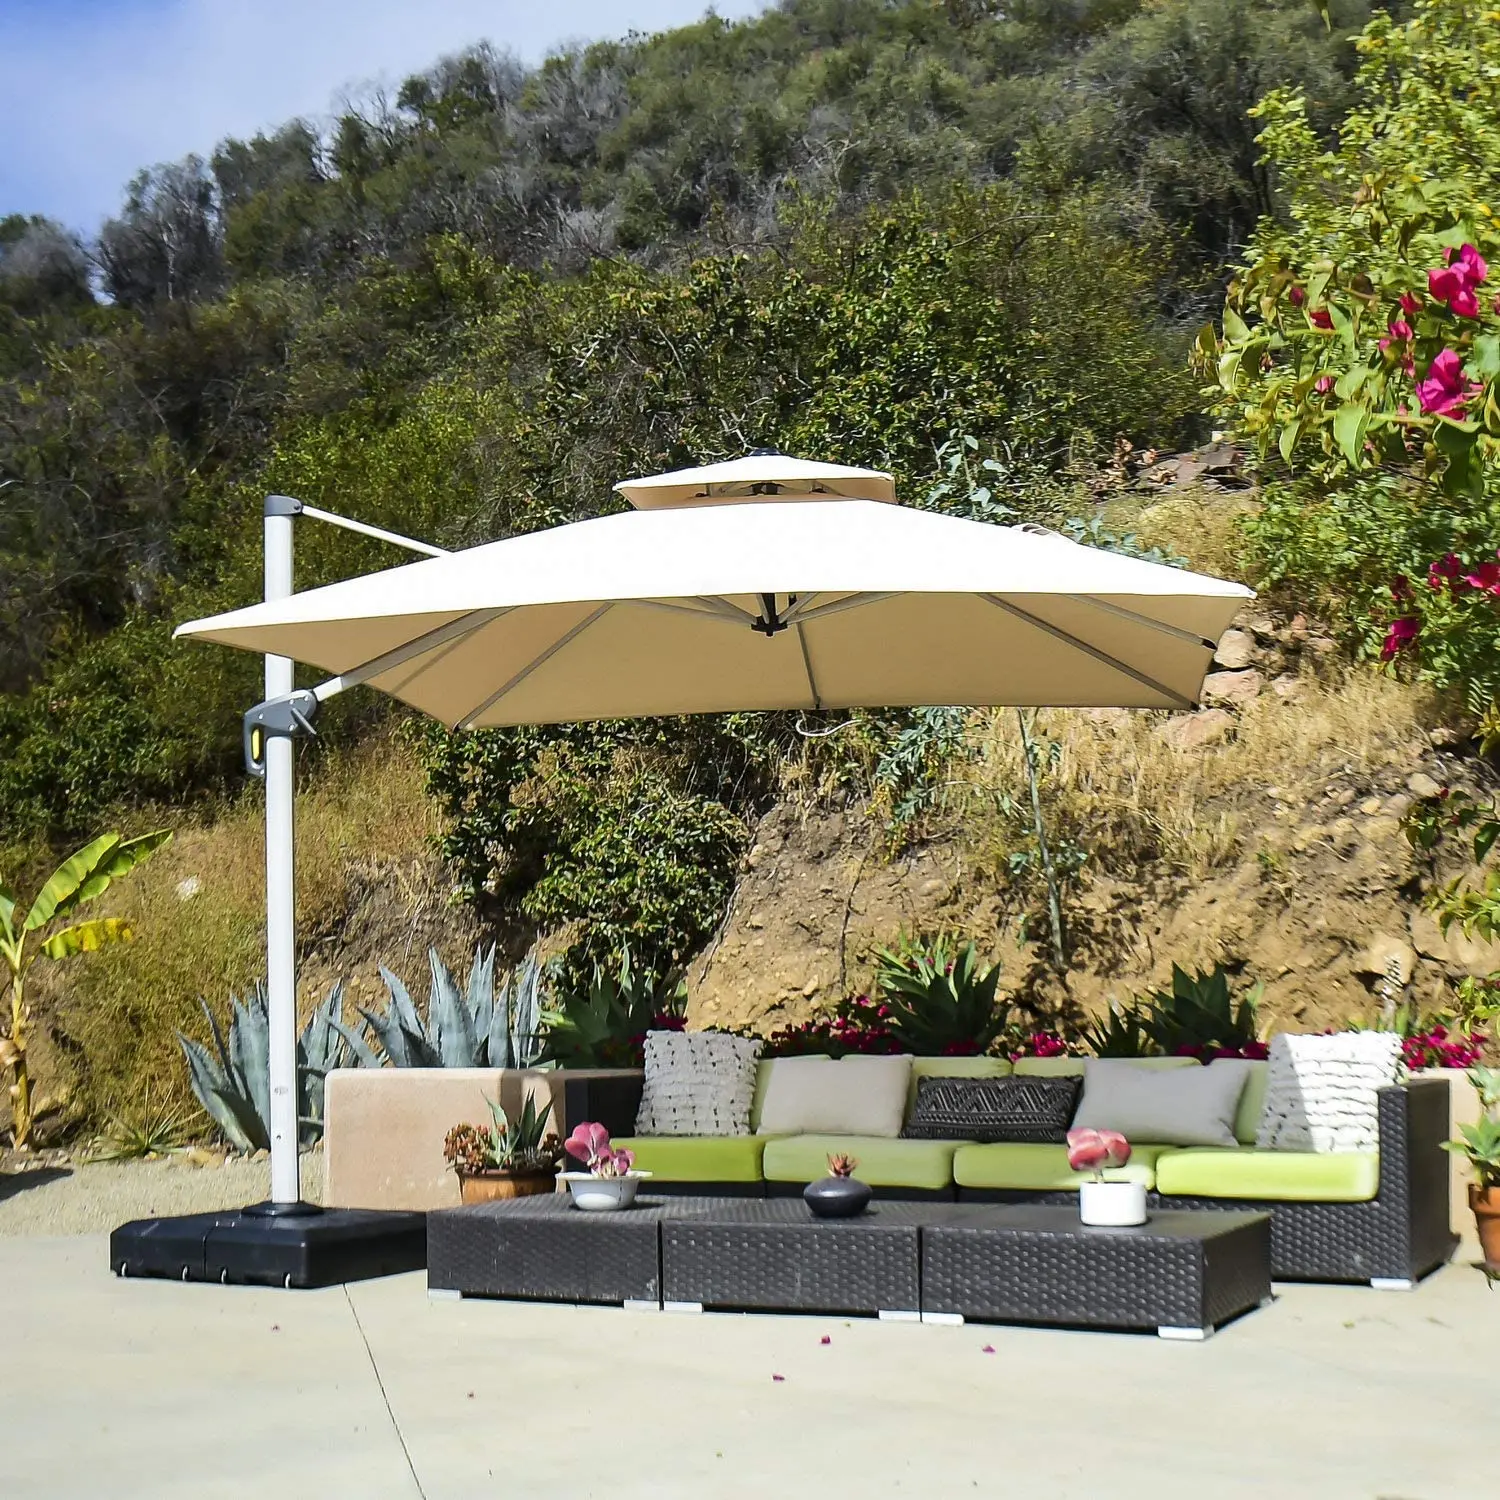 Umbrella outdoor patio cantilever offset red ft hanging ribs amazon parasols furniture shades